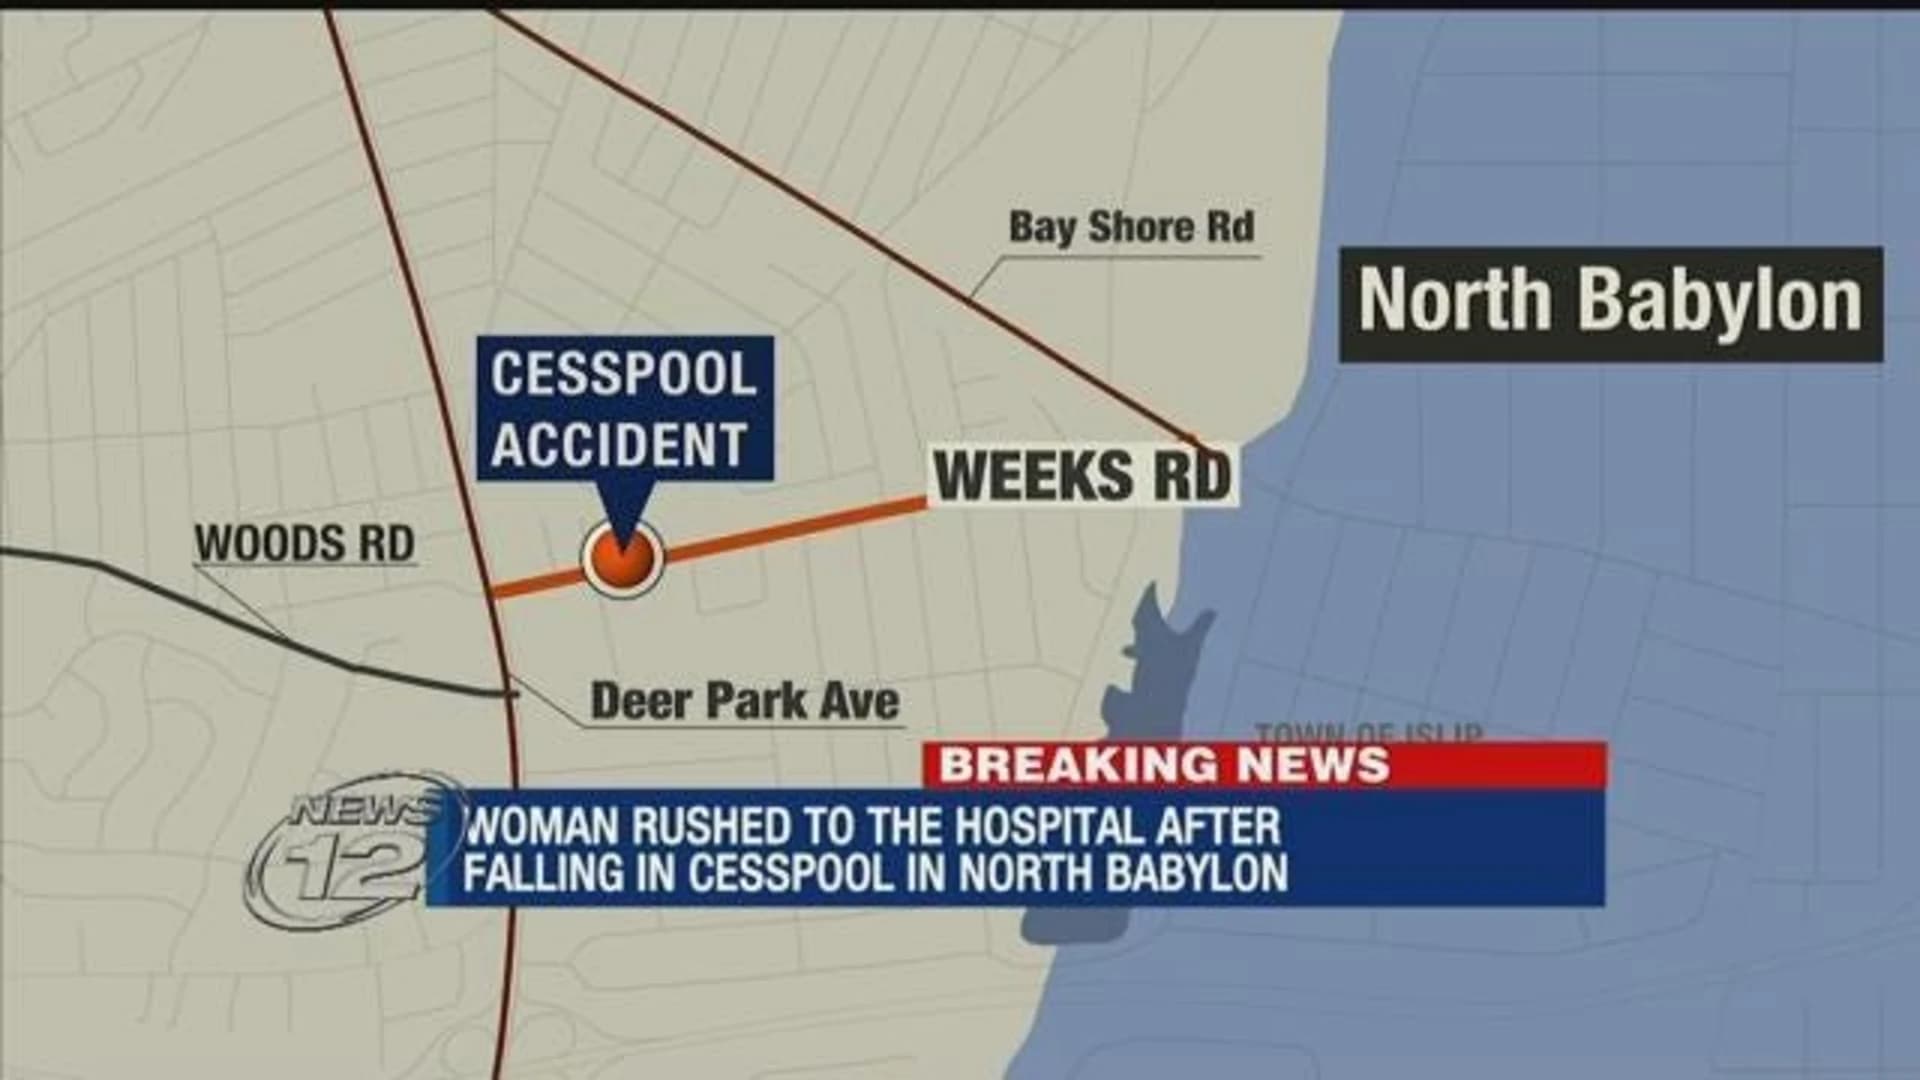 77-year-old woman injured after falling into North Babylon cesspool